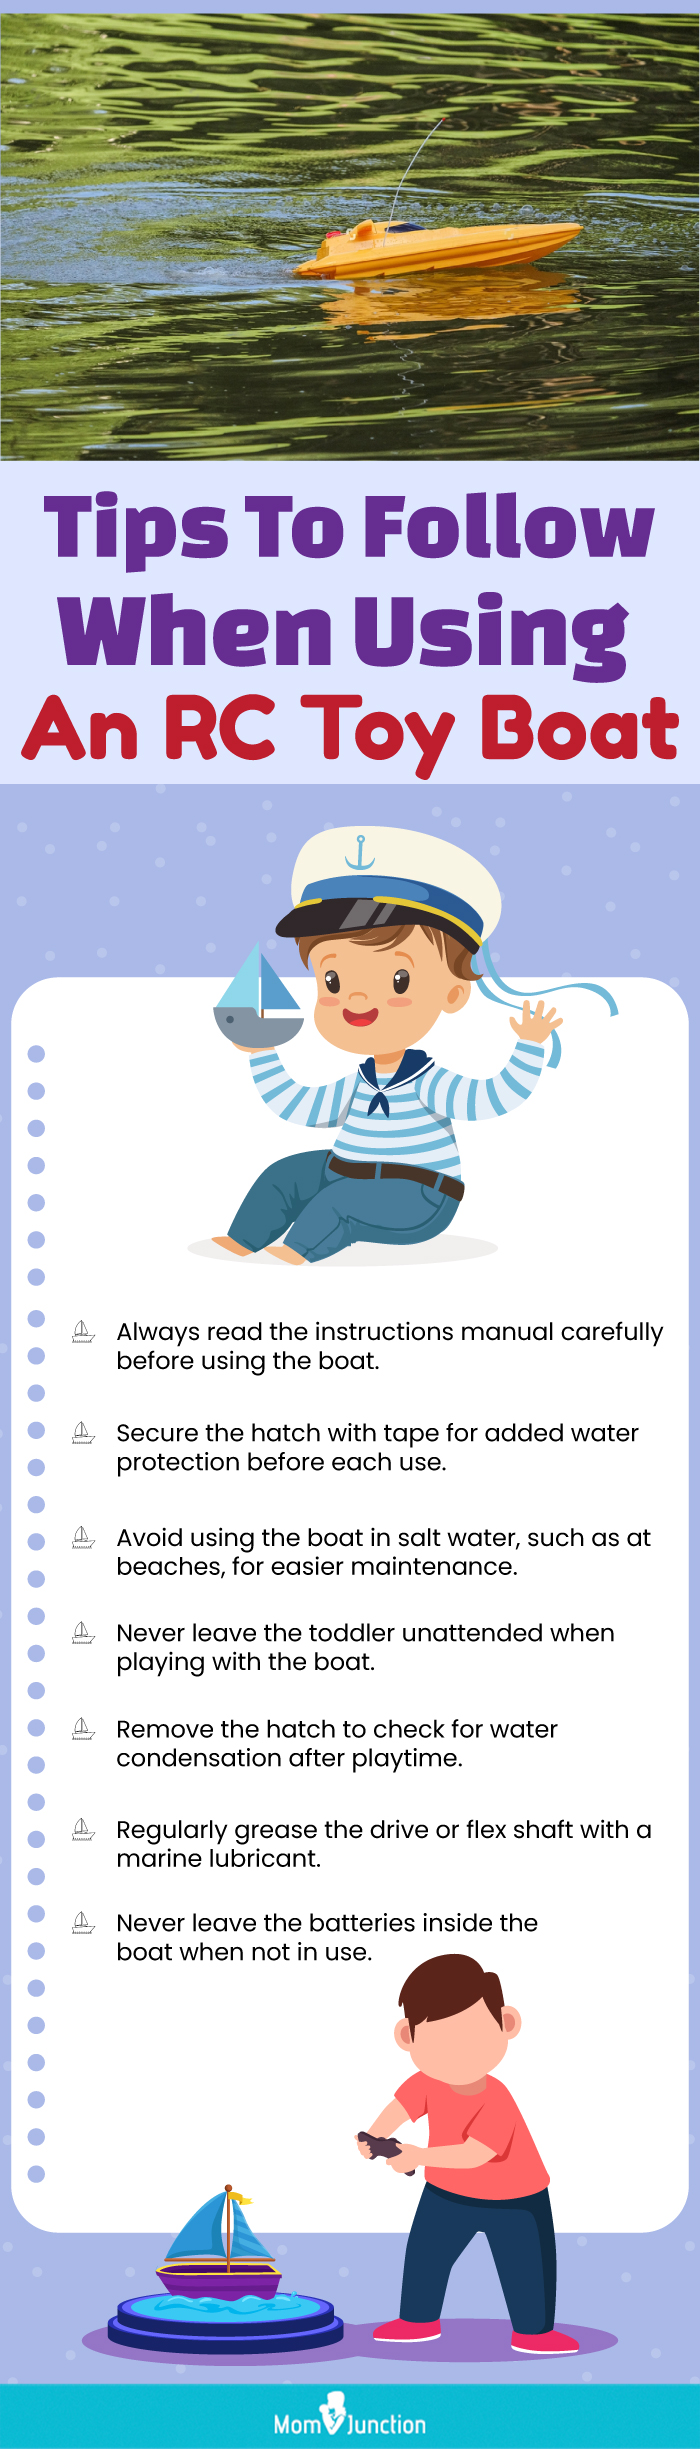 Tips To Follow When Using An RC Toy Boat (infographic)